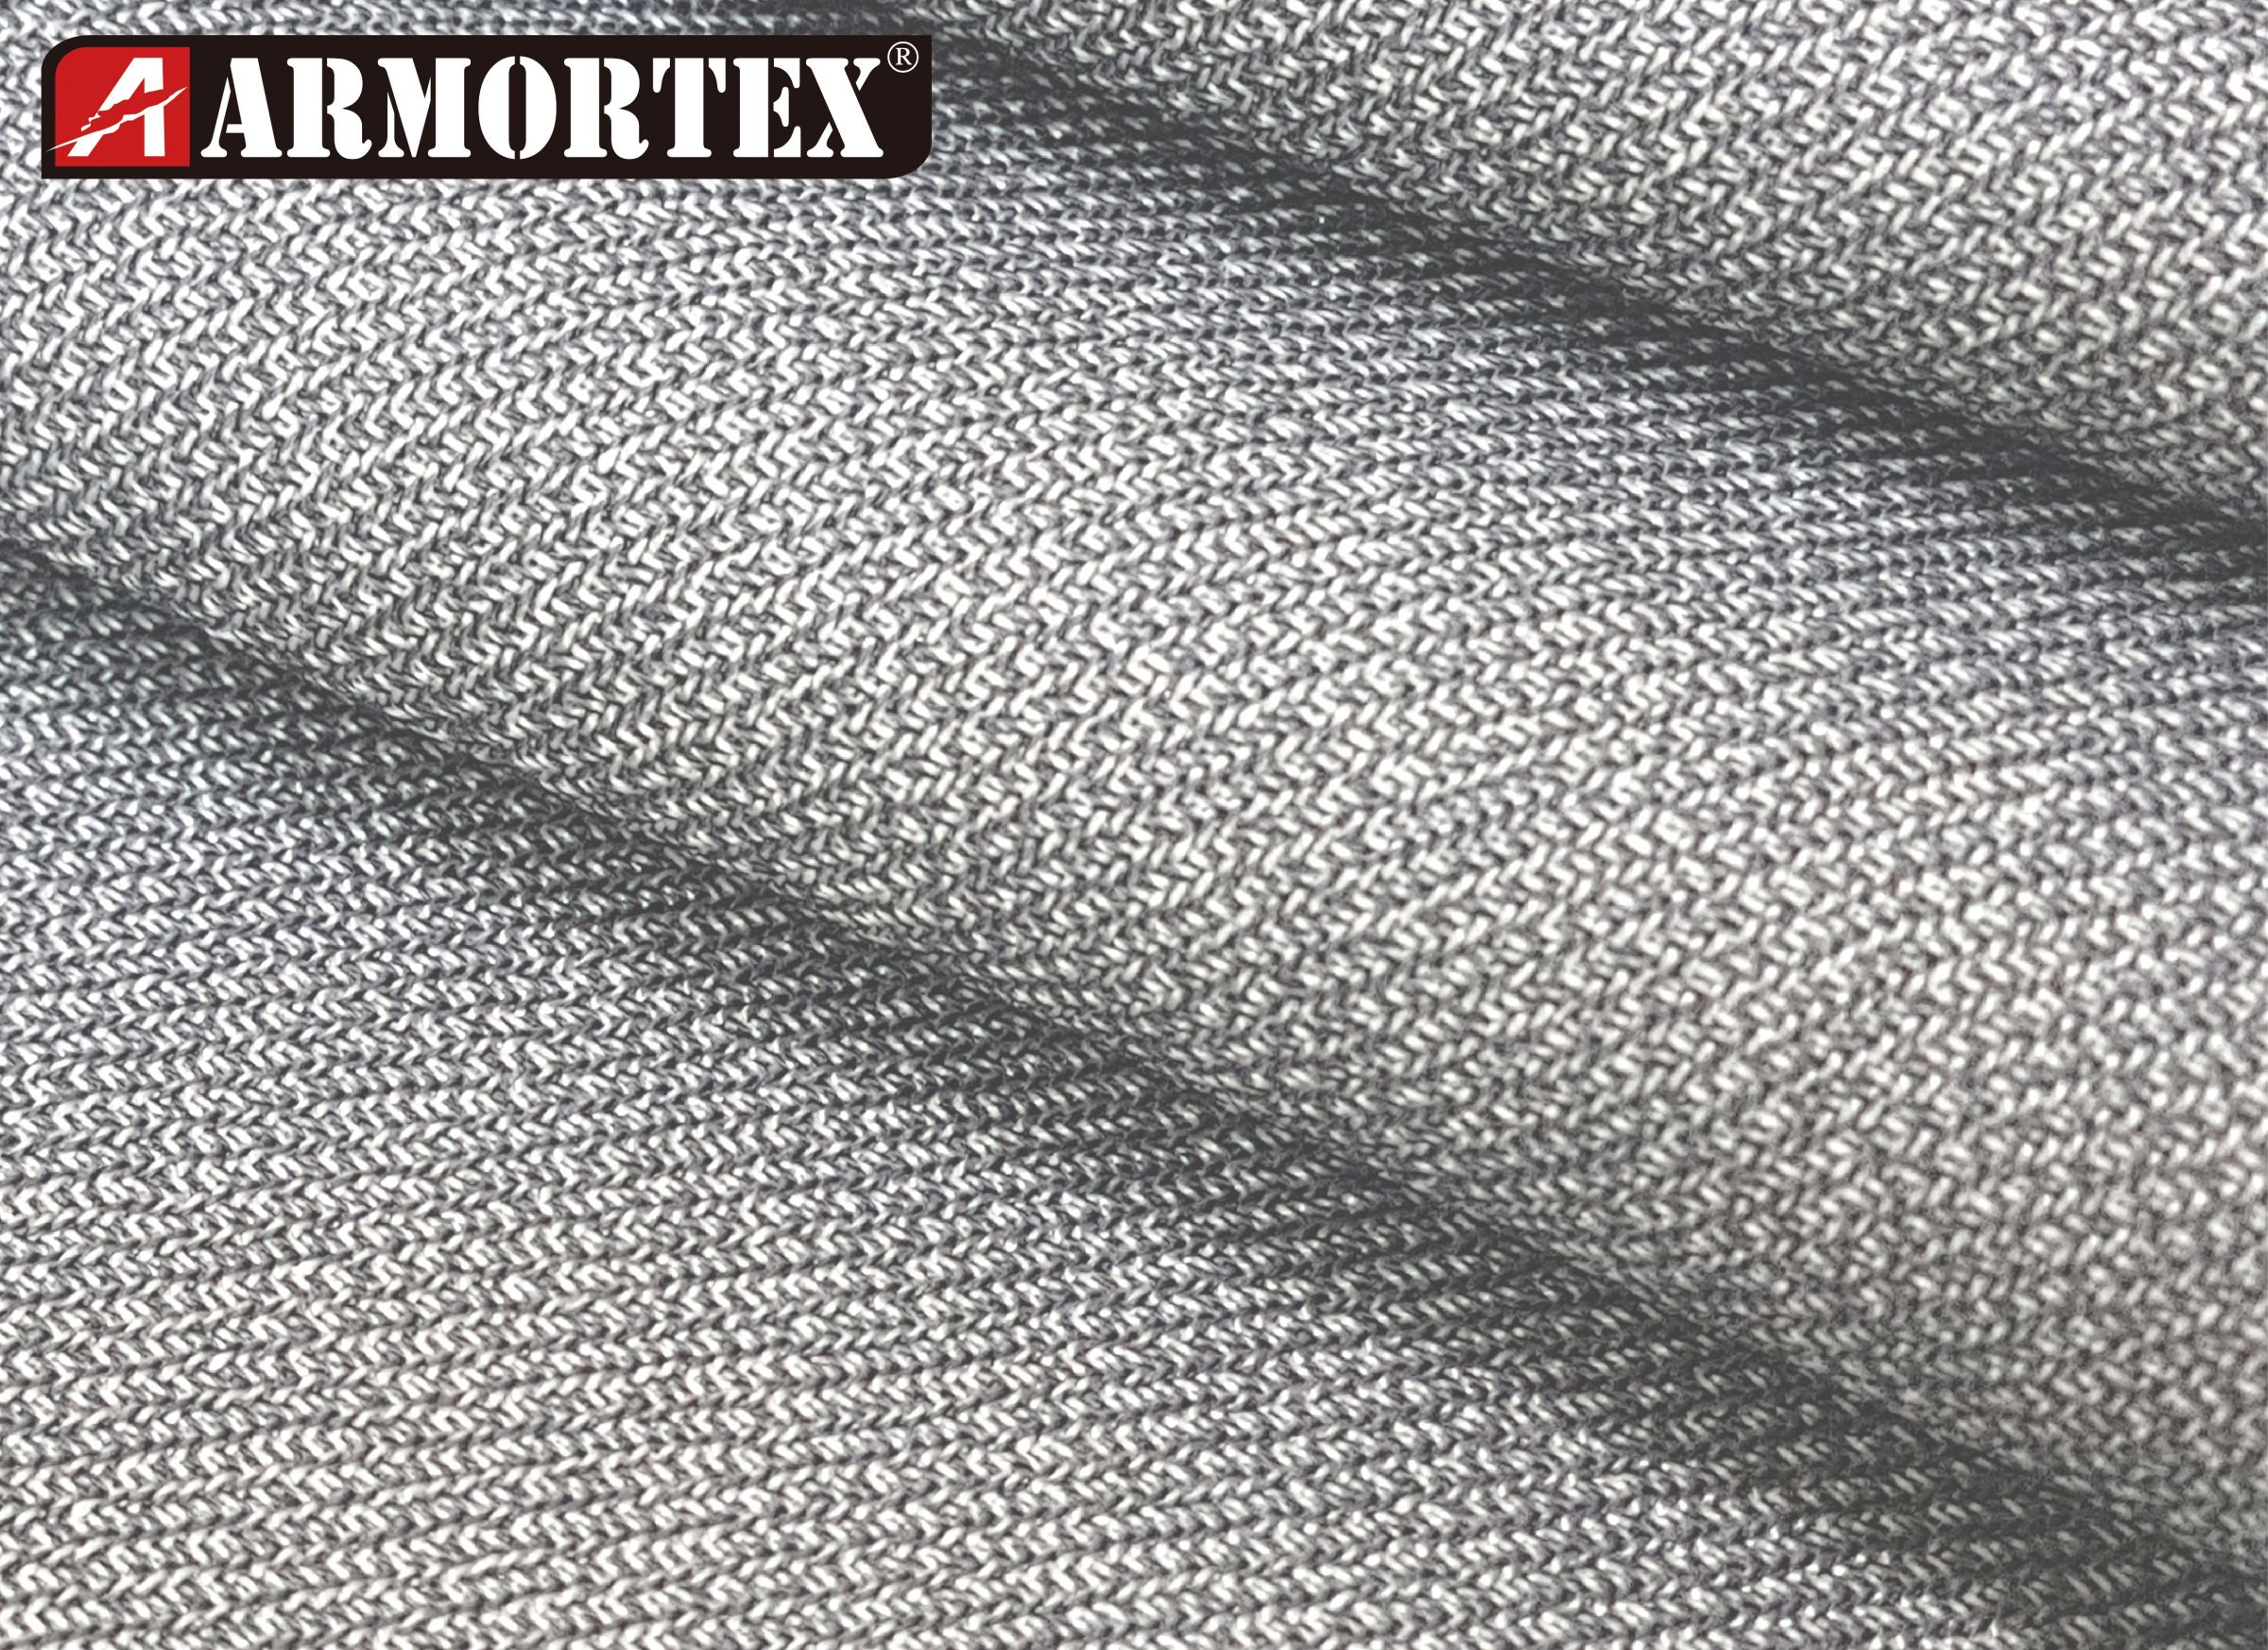 Three-dimensional Abrasion Resistant Fabric